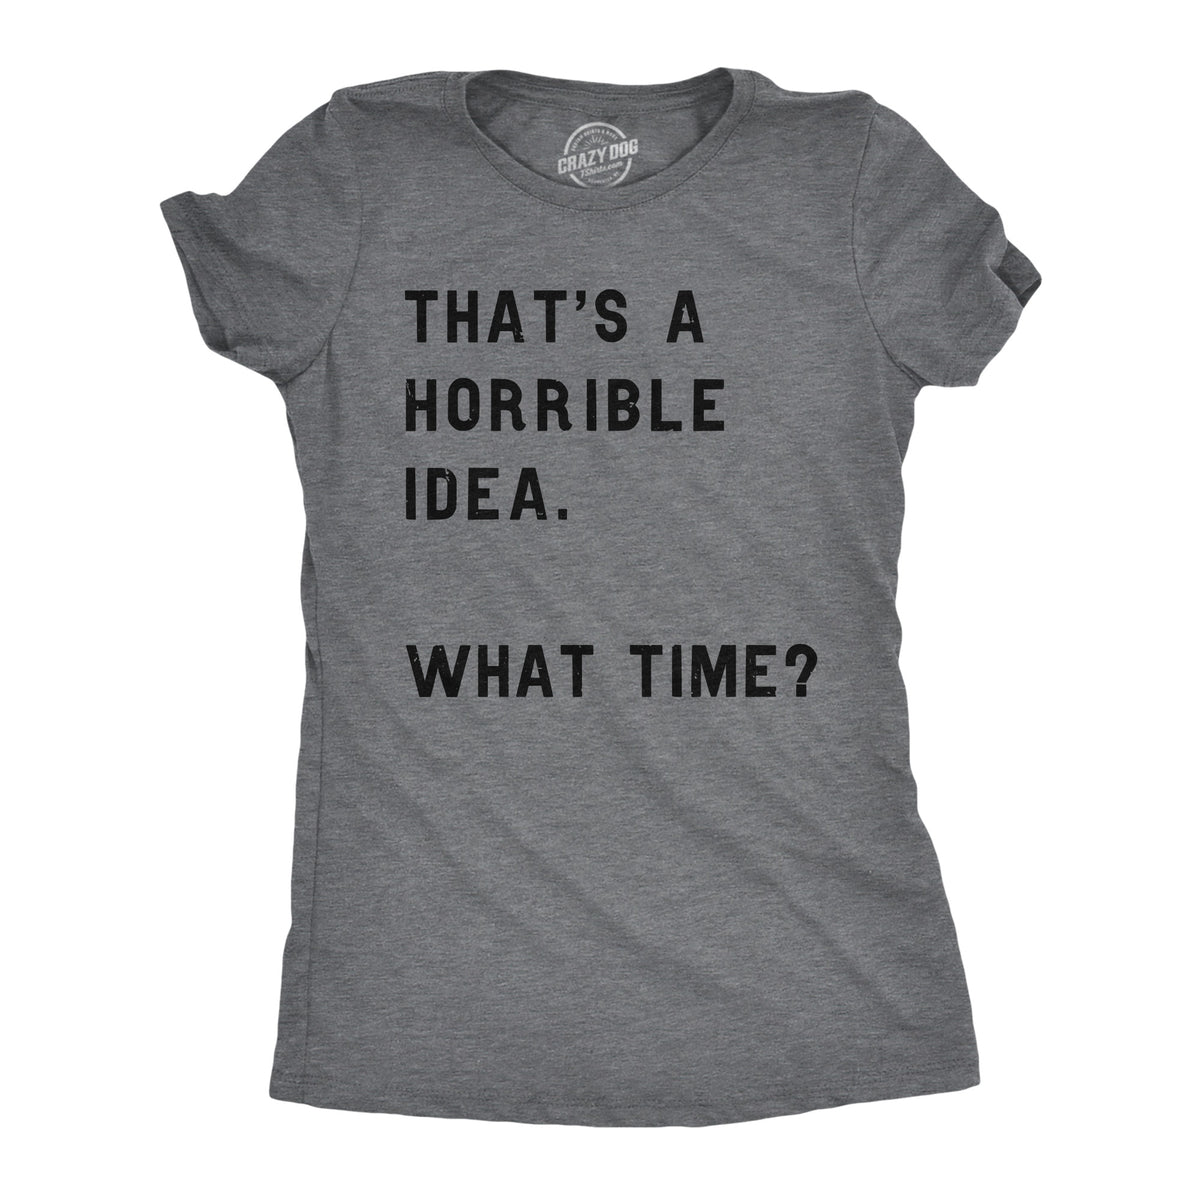 Funny Dark Heather Grey That Sounds Like A Horrible Idea. What Time? Womens T Shirt Nerdy Sarcastic Tee